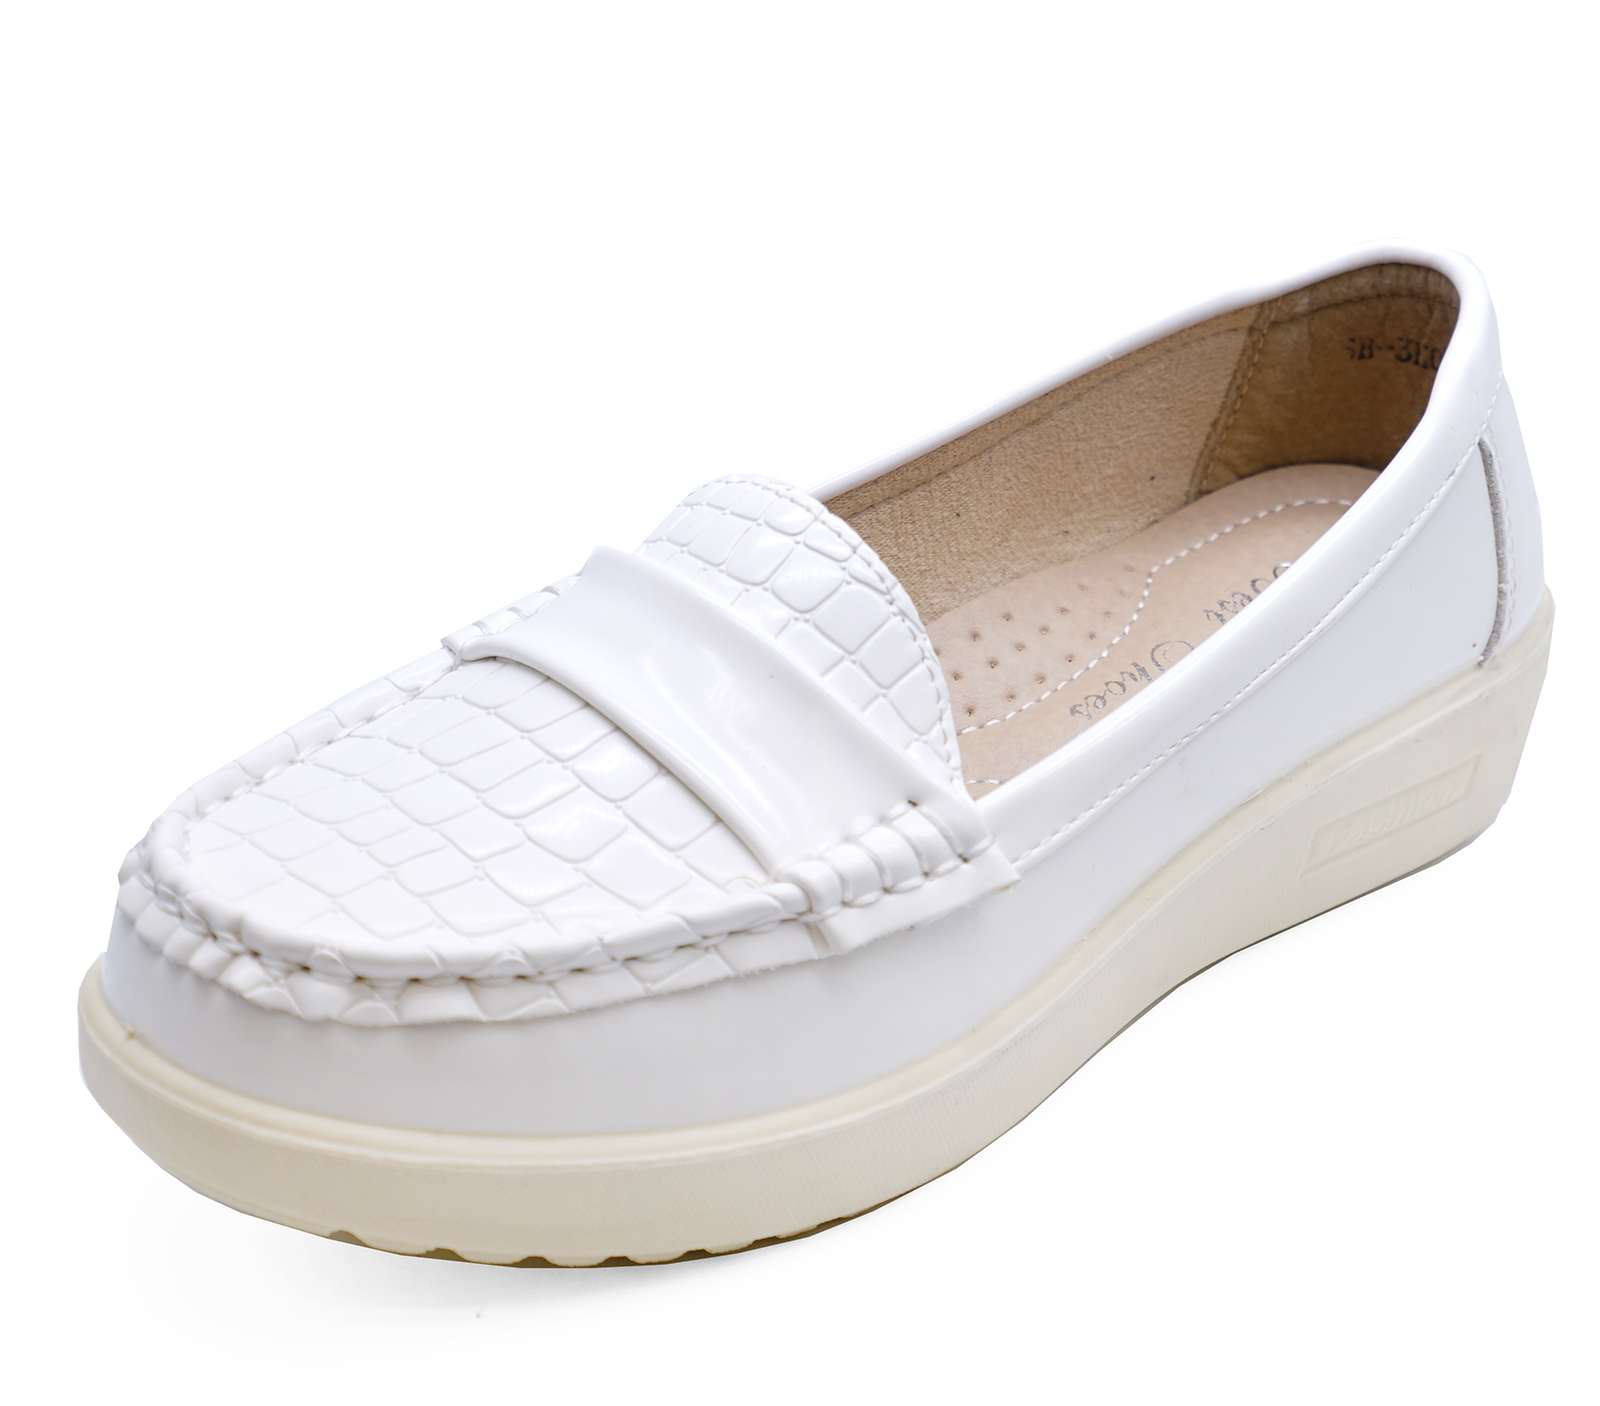 WOMENS WHITE NAUTICAL SLIP-ON LOAFERS MOCCASIN COMFY DECK DRIVING SHOES 2-8